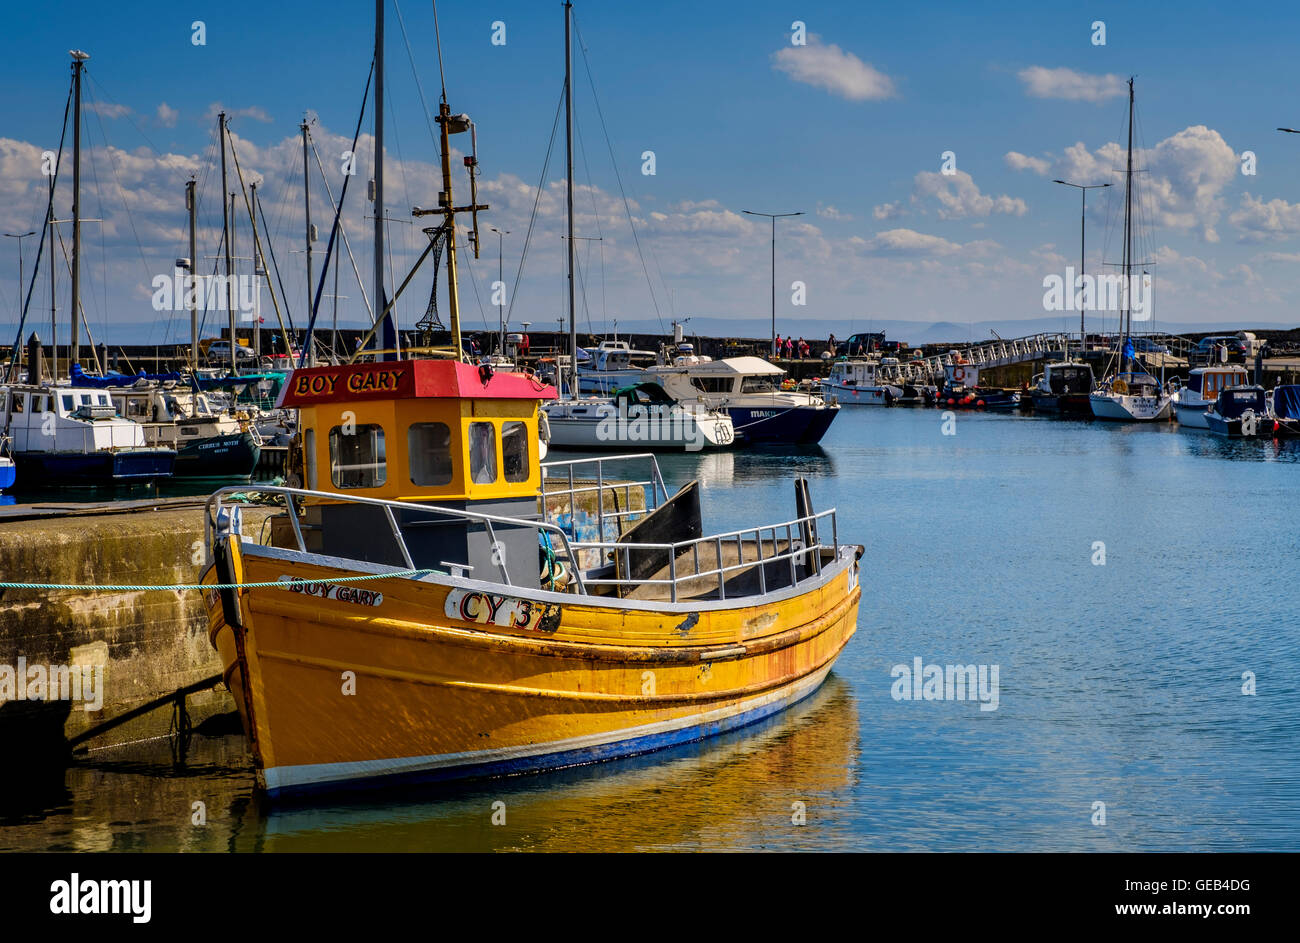 Pleasure craft in the harbour in Anstruther, Fife, Scotland Stock Photo